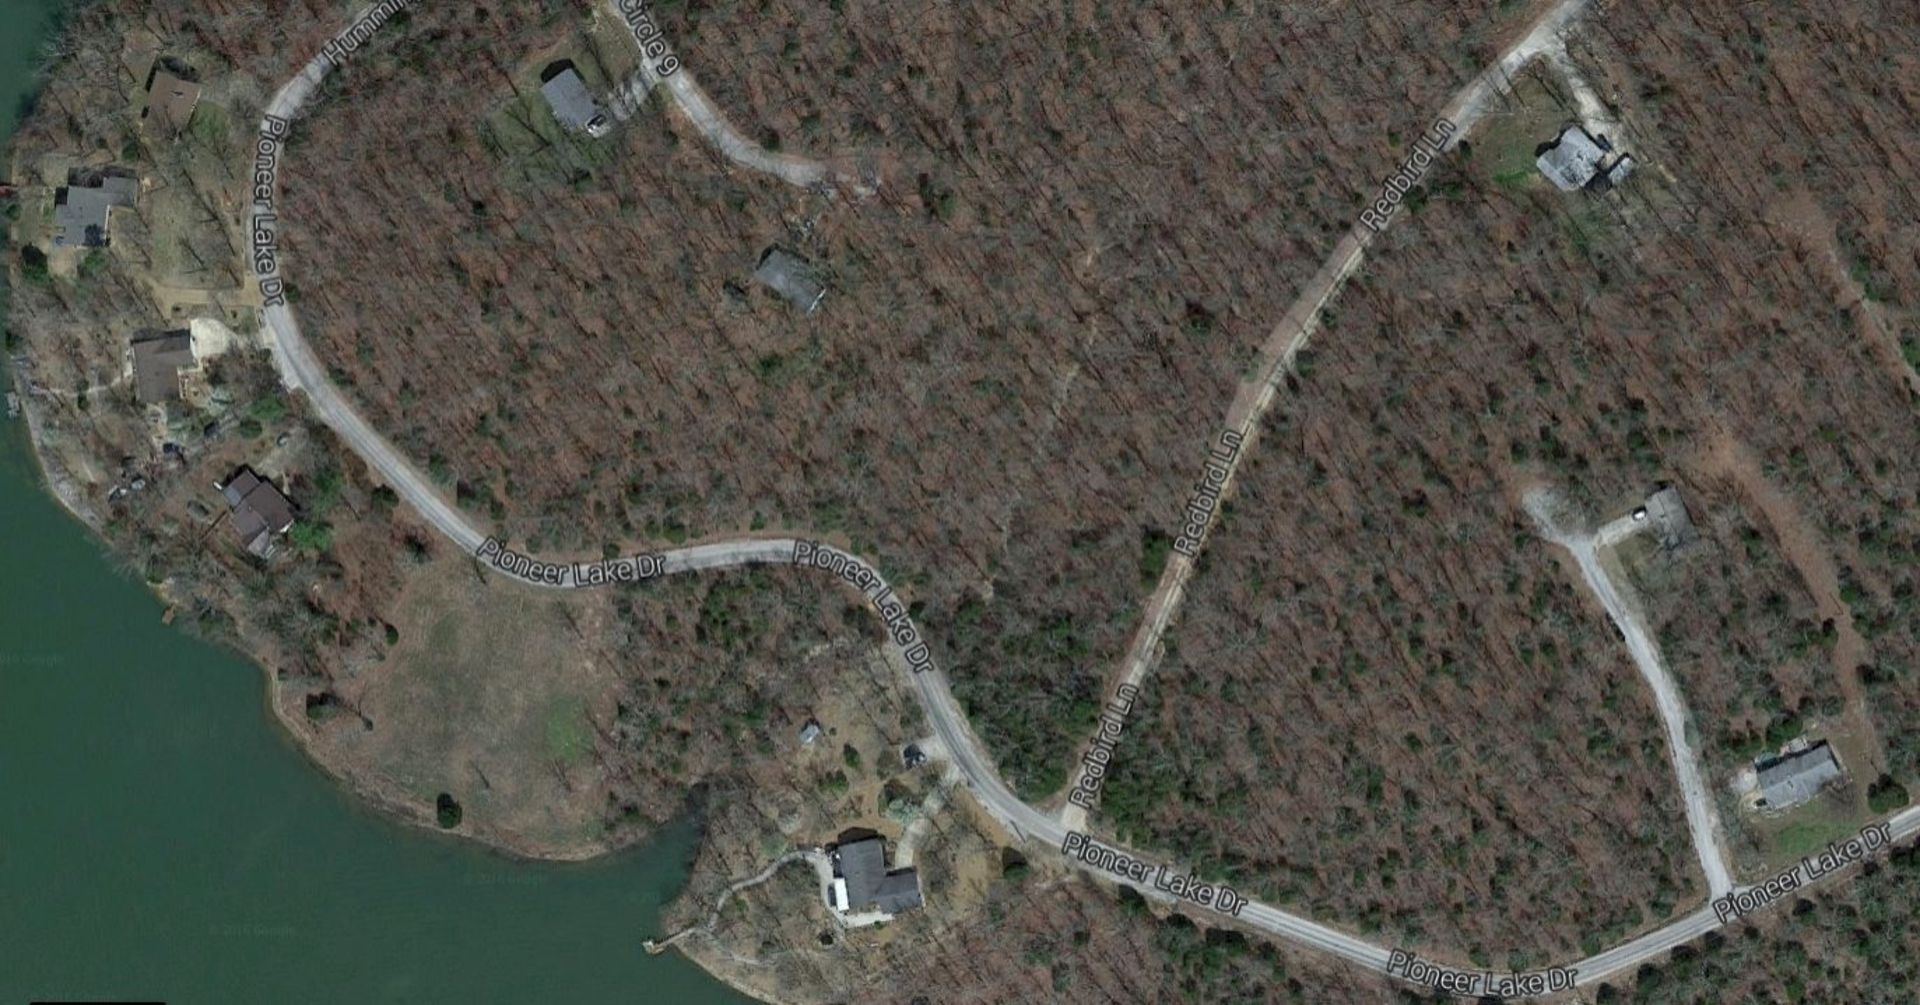 ADJOINING LOTS IN HORSESHOE BEND, ARKANSAS. OWN THE DREAM..! YOU ARE BIDDING FOR PLOT NO. 506. - Image 7 of 7